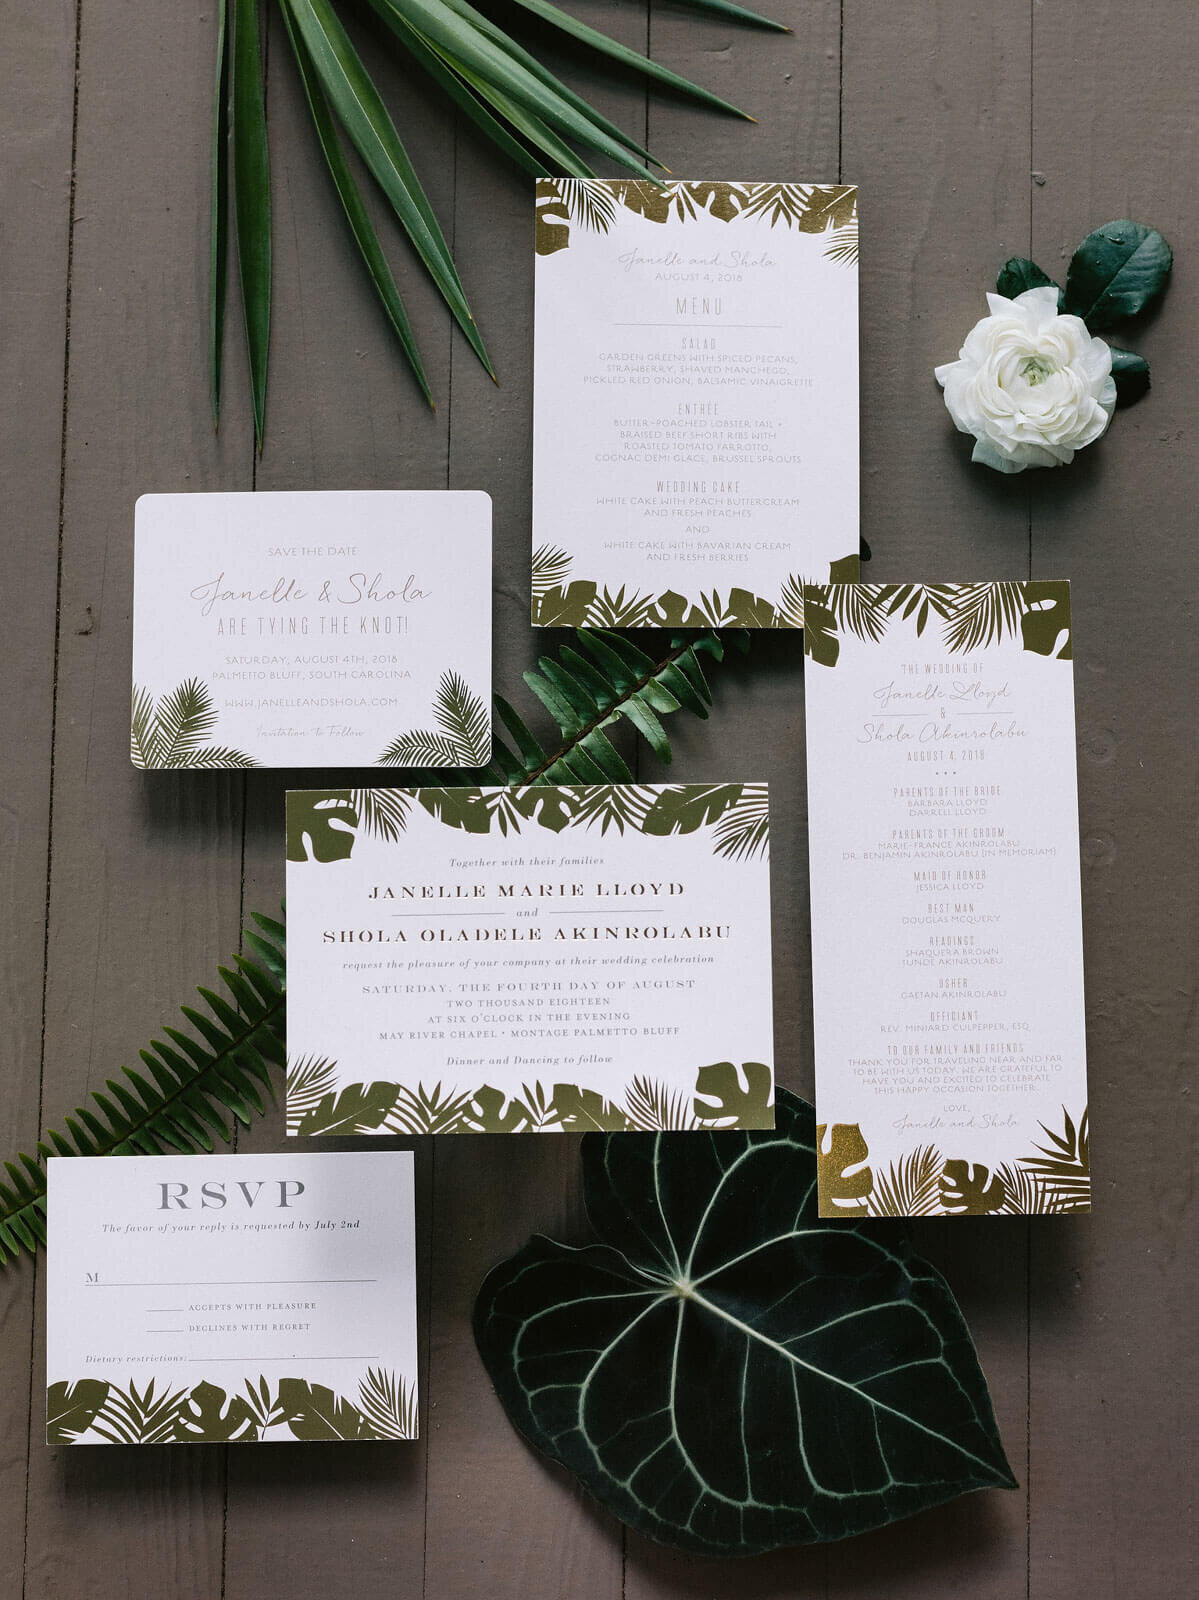 Elegant wedding invitation cards on a wooden table in Montage at Palmetto Bluff. Destination wedding image by Jenny Fu Studio